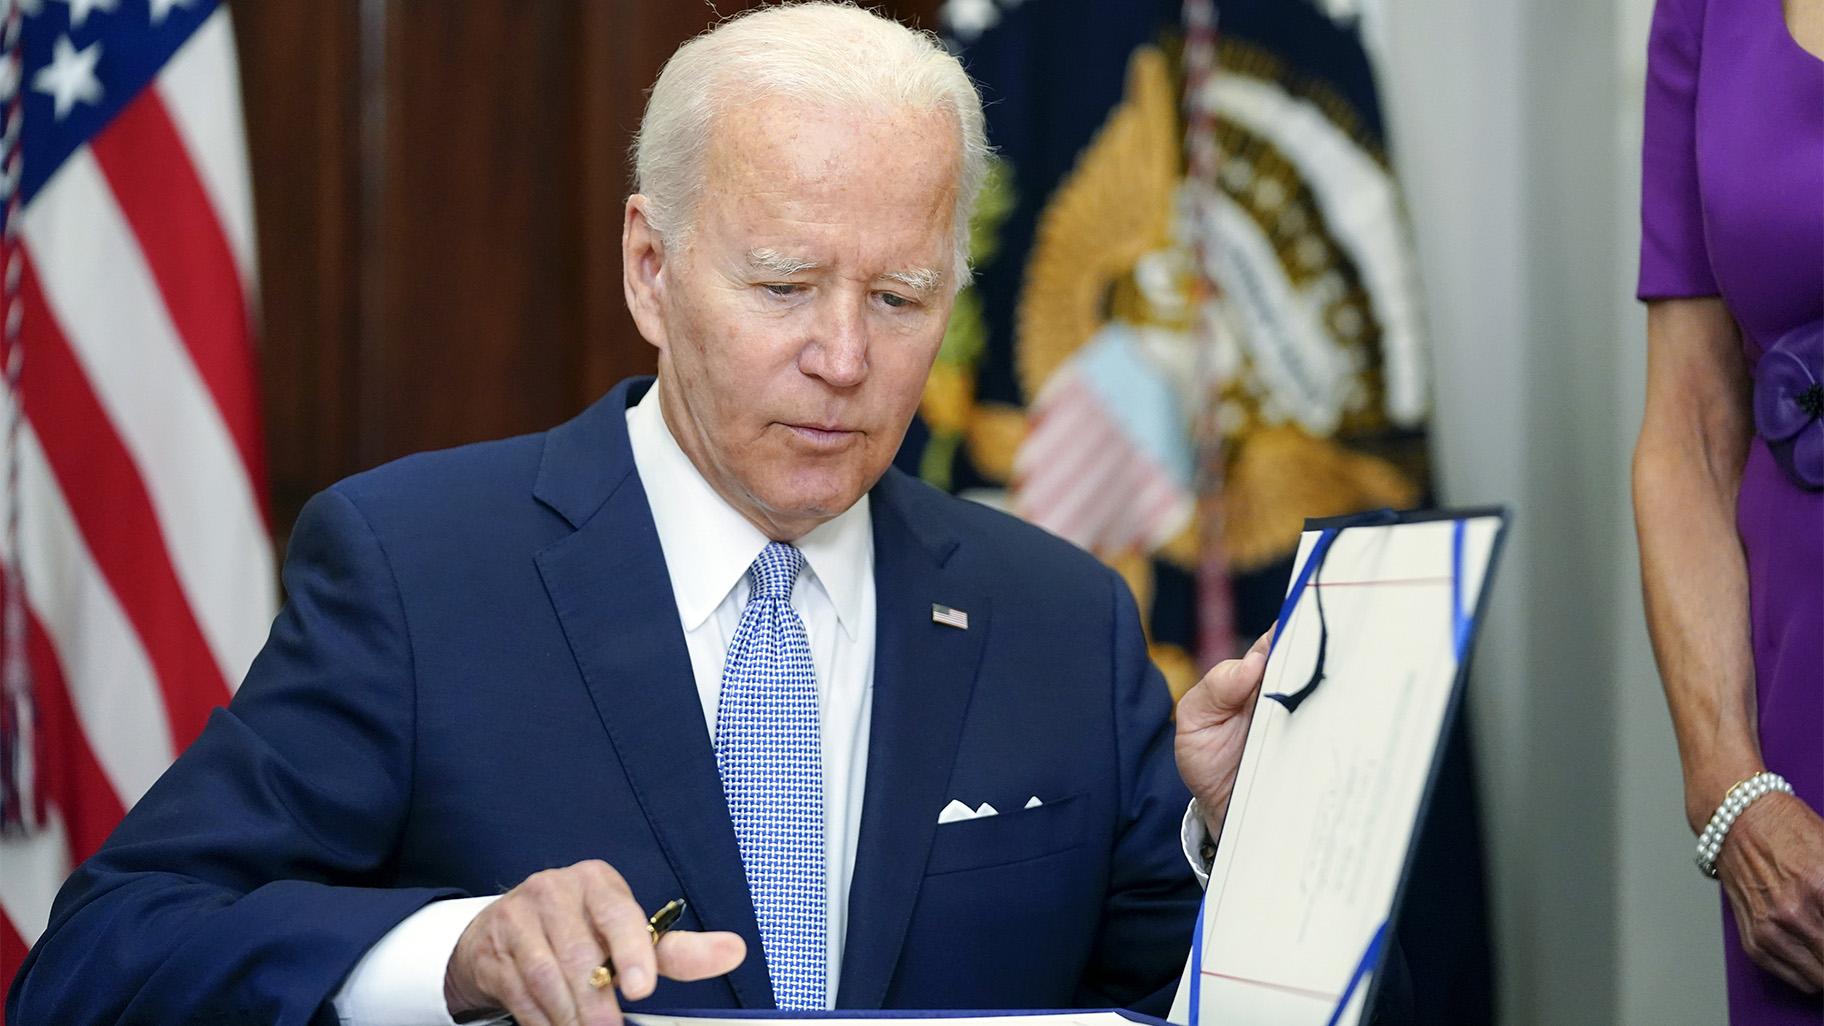 President Joe Biden signs into law S. 2938, the Bipartisan Safer Communities Act gun safety bill, in the Roosevelt Room of the White House in Washington, Saturday, June 25, 2022. (AP Photo / Pablo Martinez Monsivais)